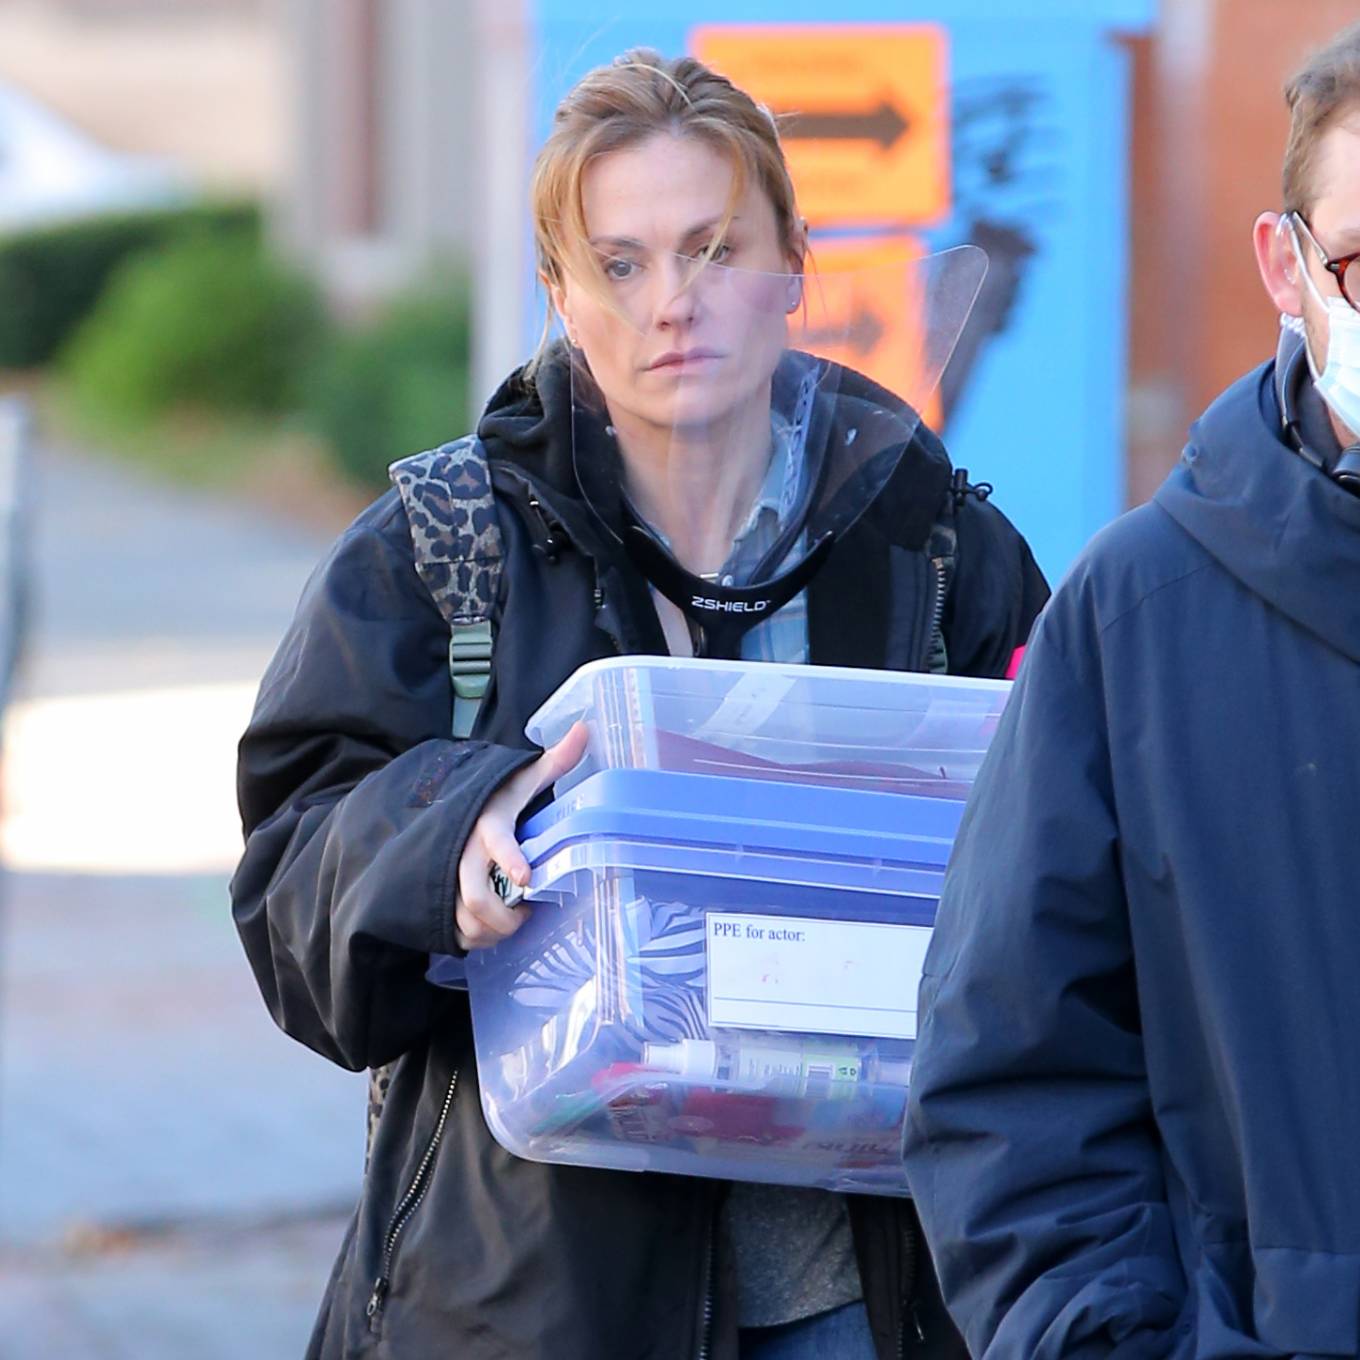 Anna Paquin – On the set of ‘Modern Love’ filming at Healthy Cafe in Schenectady